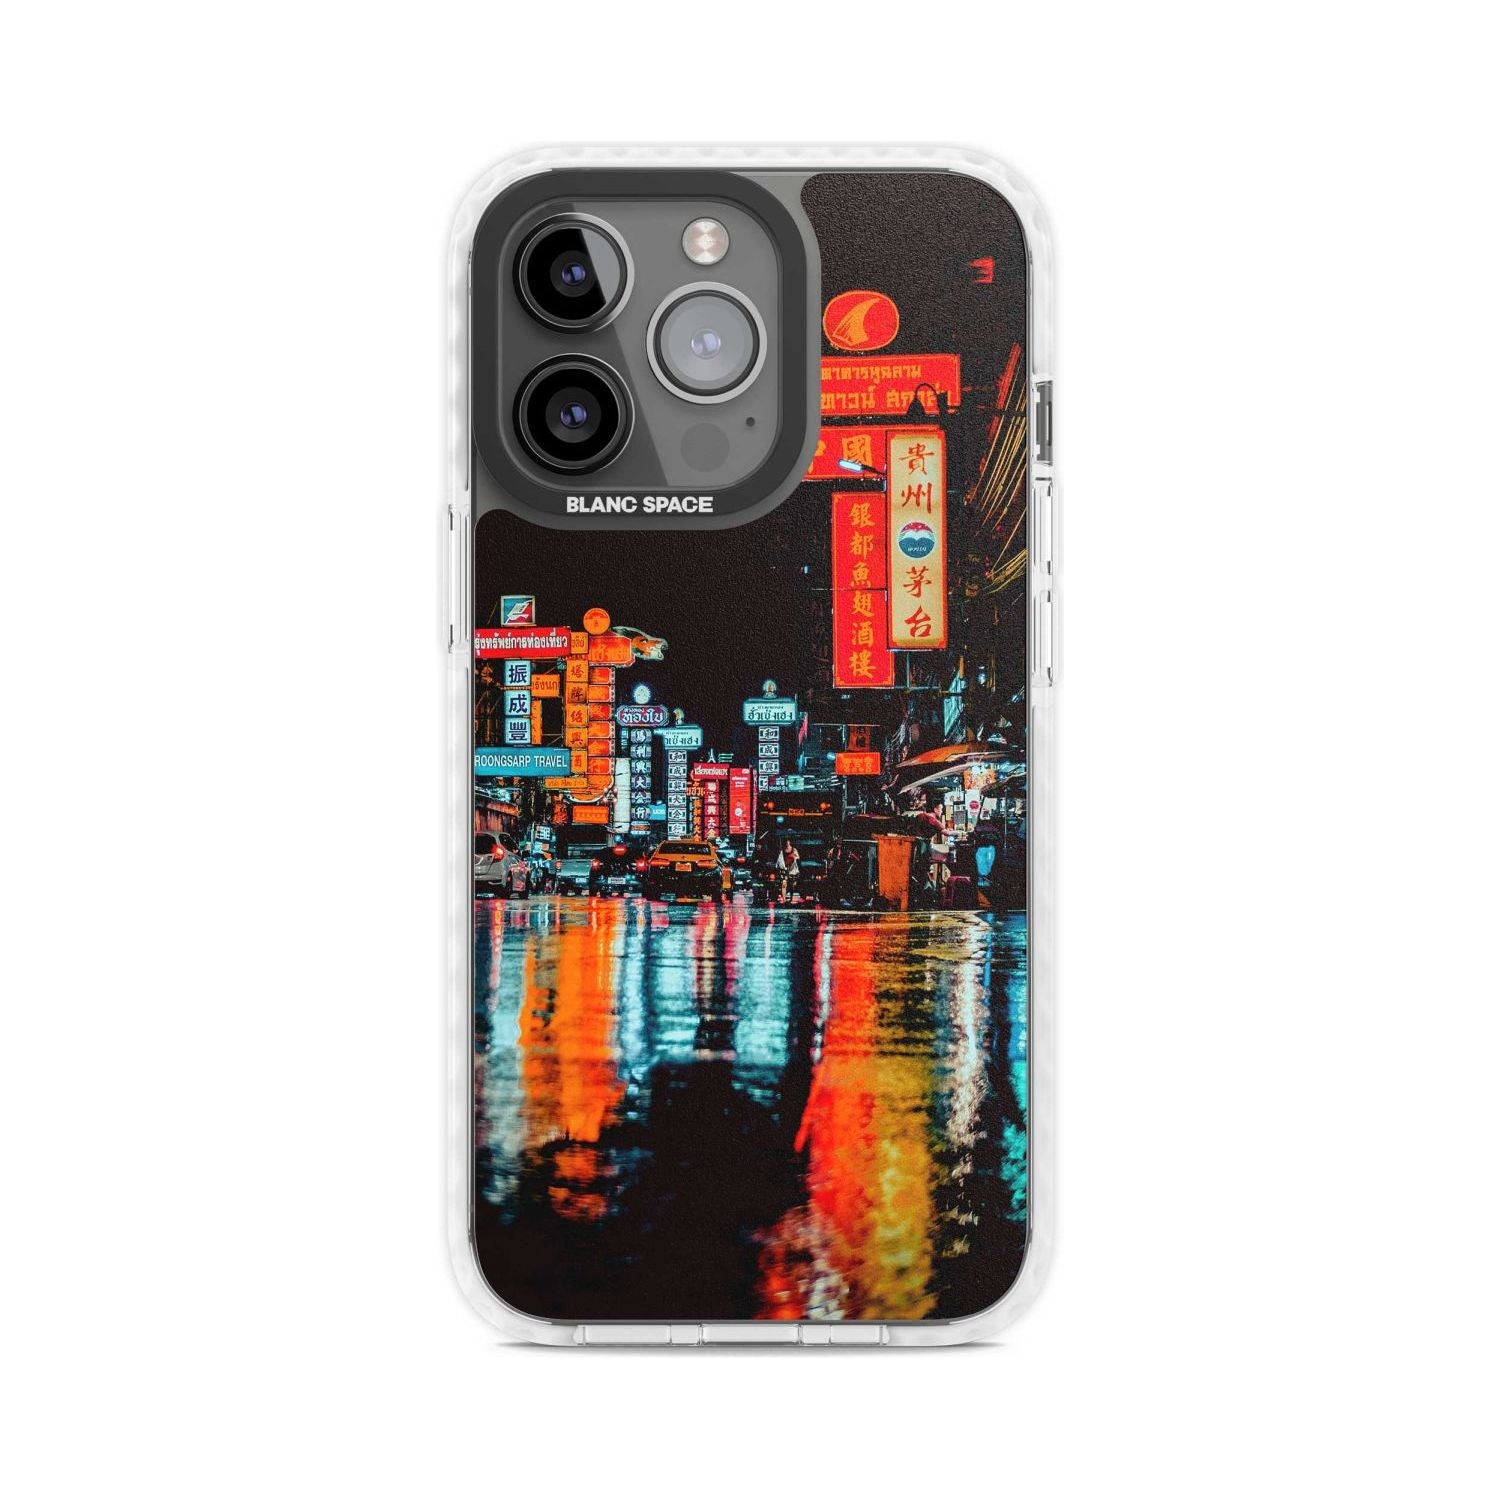 Neon City Phone Case iPhone 15 Pro Max / Magsafe Impact Case,iPhone 15 Pro / Magsafe Impact Case Blanc Space